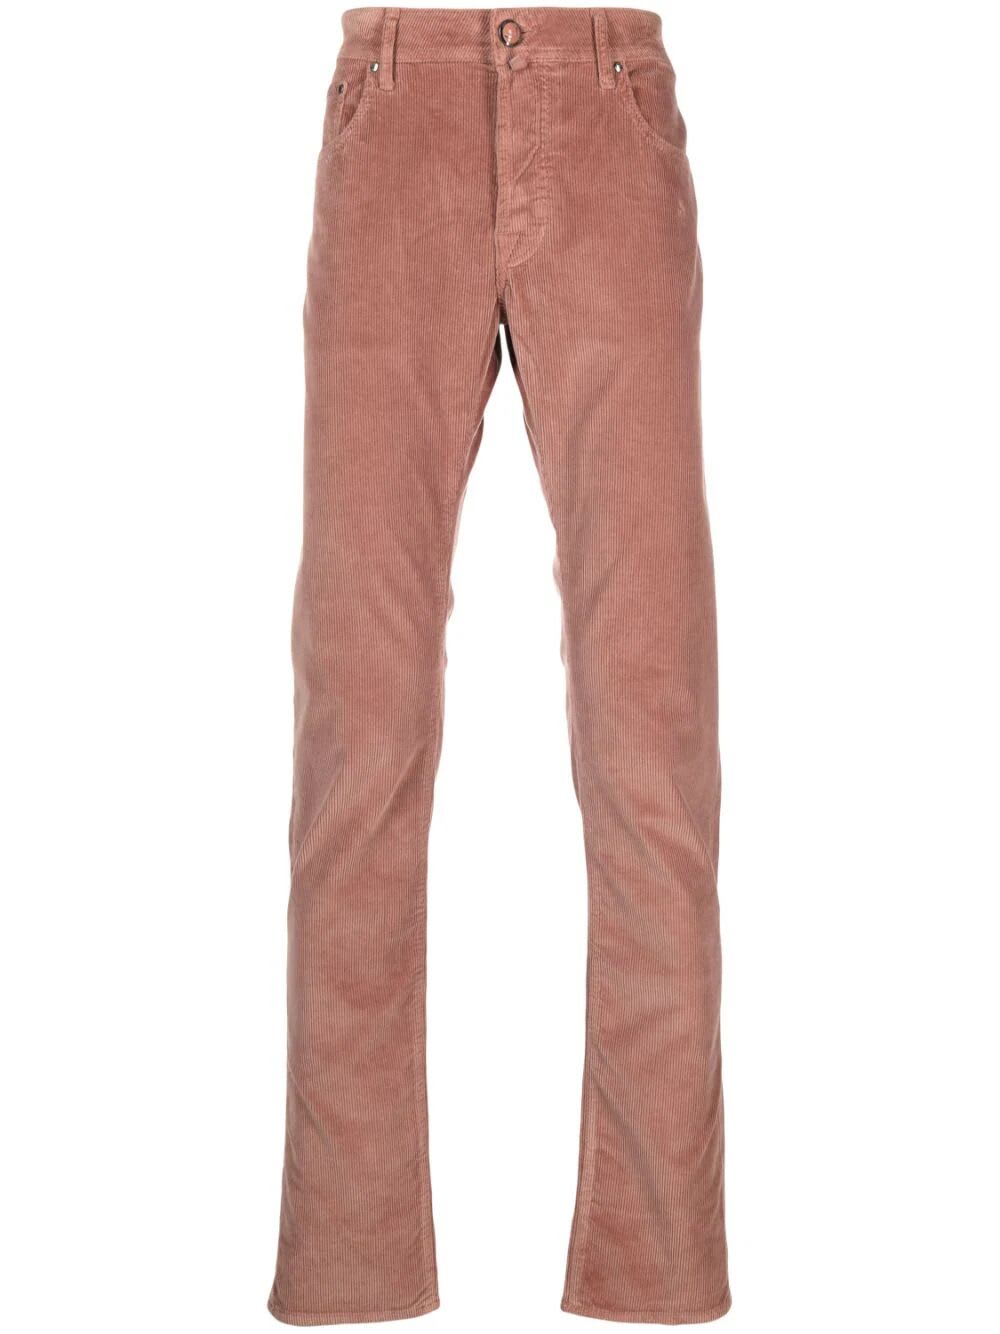 Jacob Cohen Bard Slim Fit Jeans In Dusty Pink